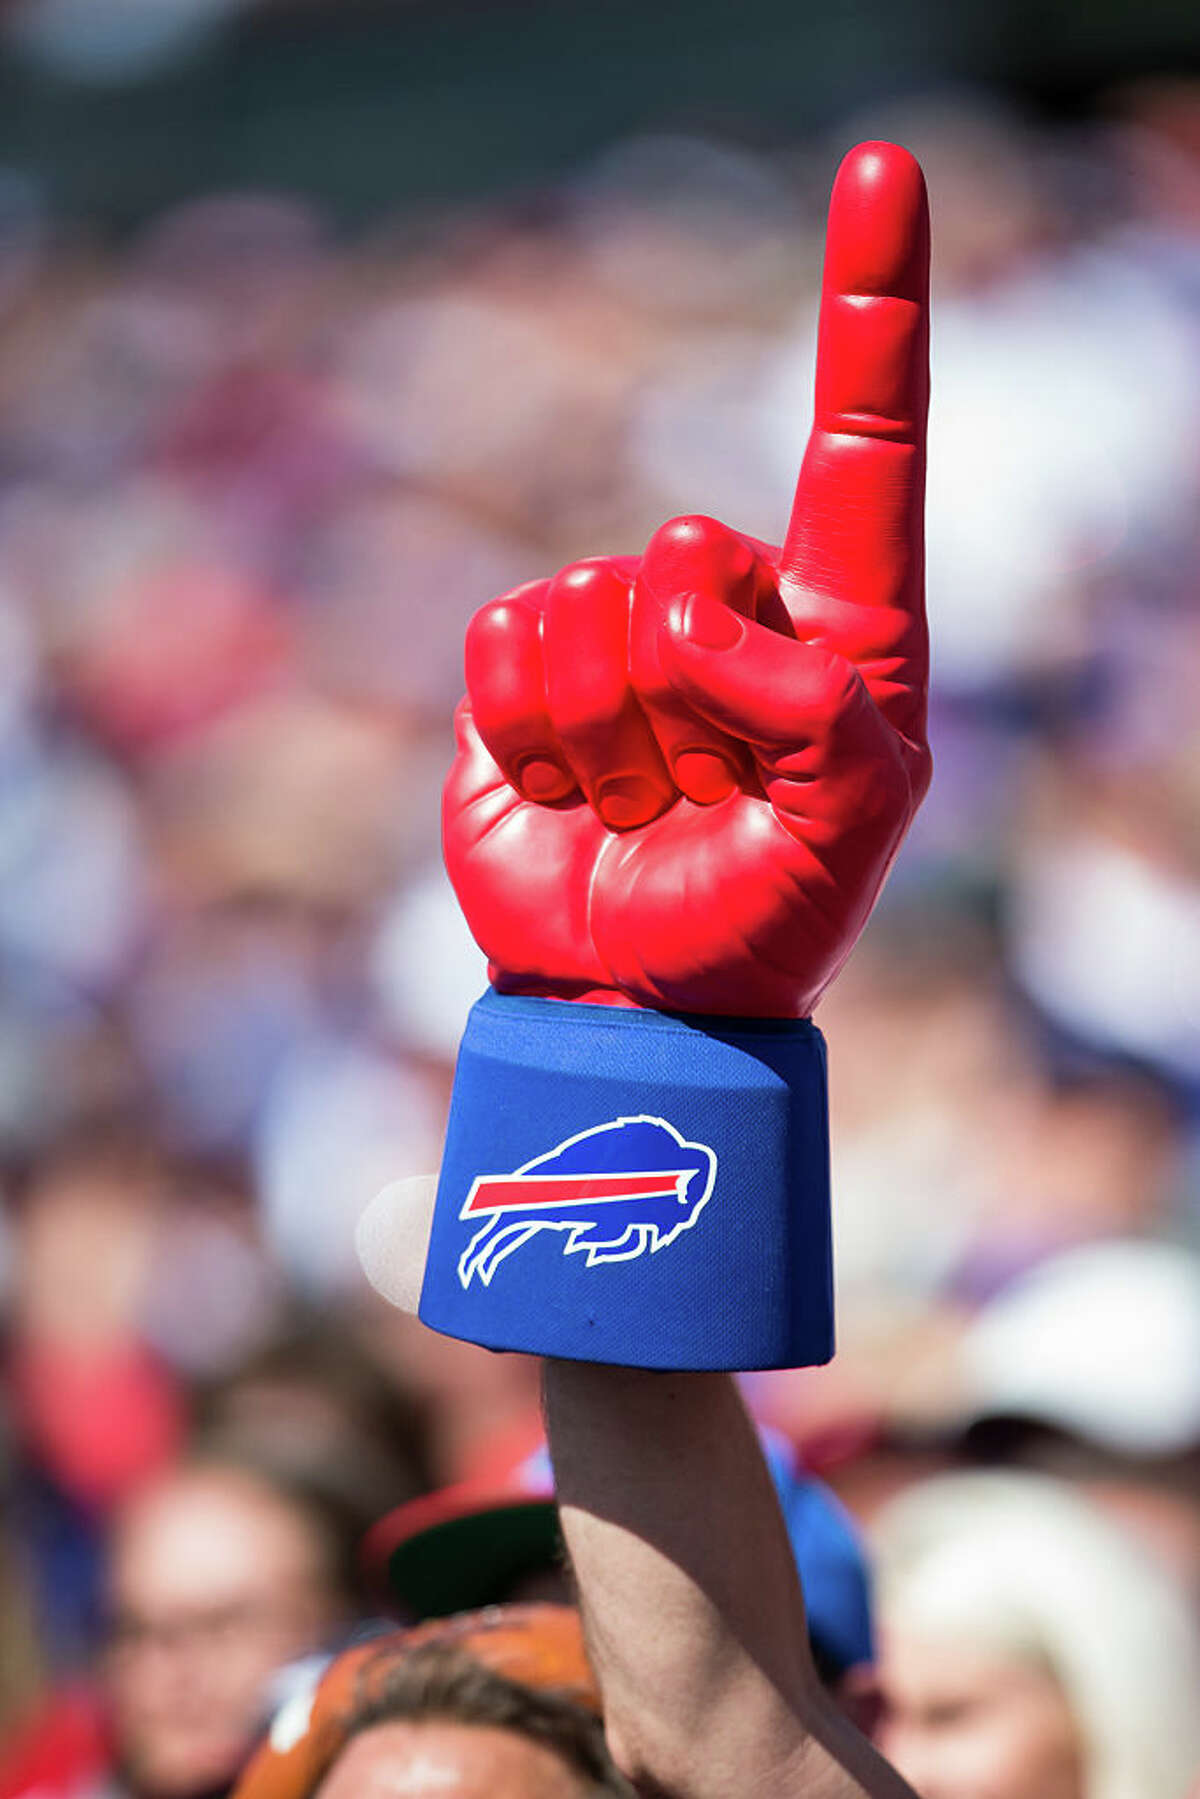 Commentary: Bills' stadium plans leave longtime fans out in the cold